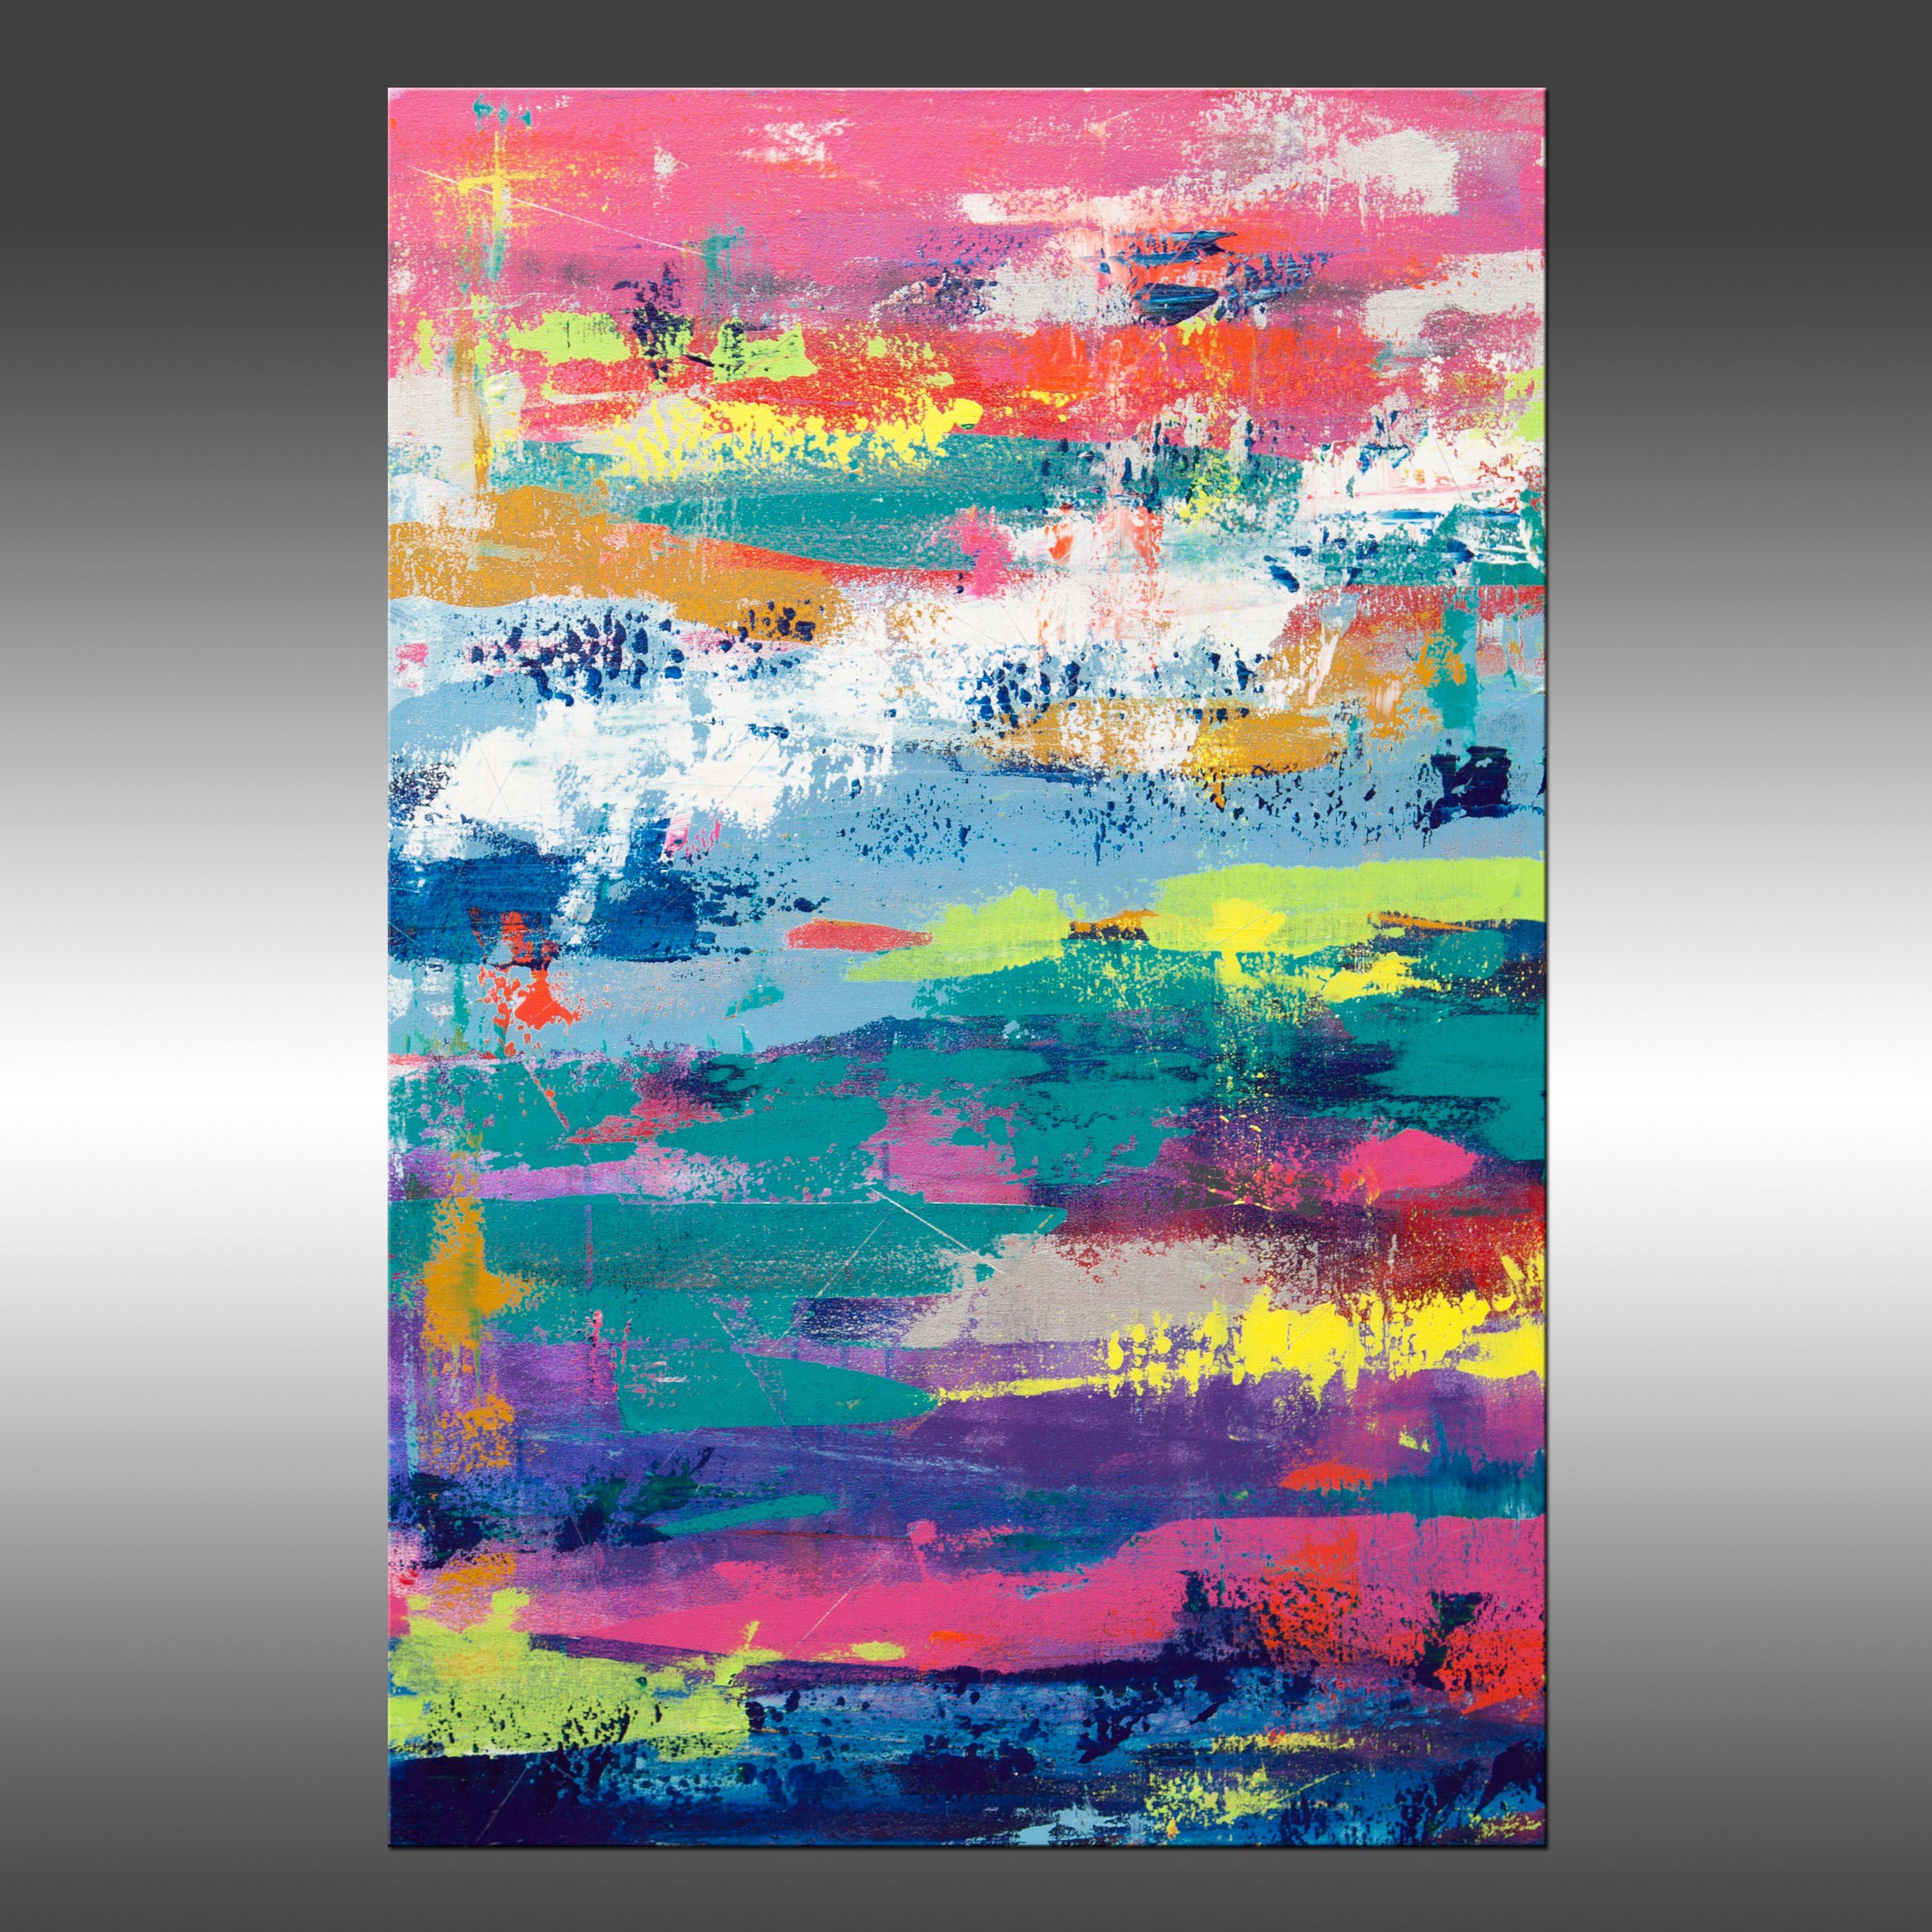 Reclaimed 6 is an original painting, created with acrylic paint on gallery-wrapped canvas. It has a width of 24 inches and a height of 36 inches with a depth of 1.5 inches (36x24x1.5).    The colors used in the painting are white, teal, green,